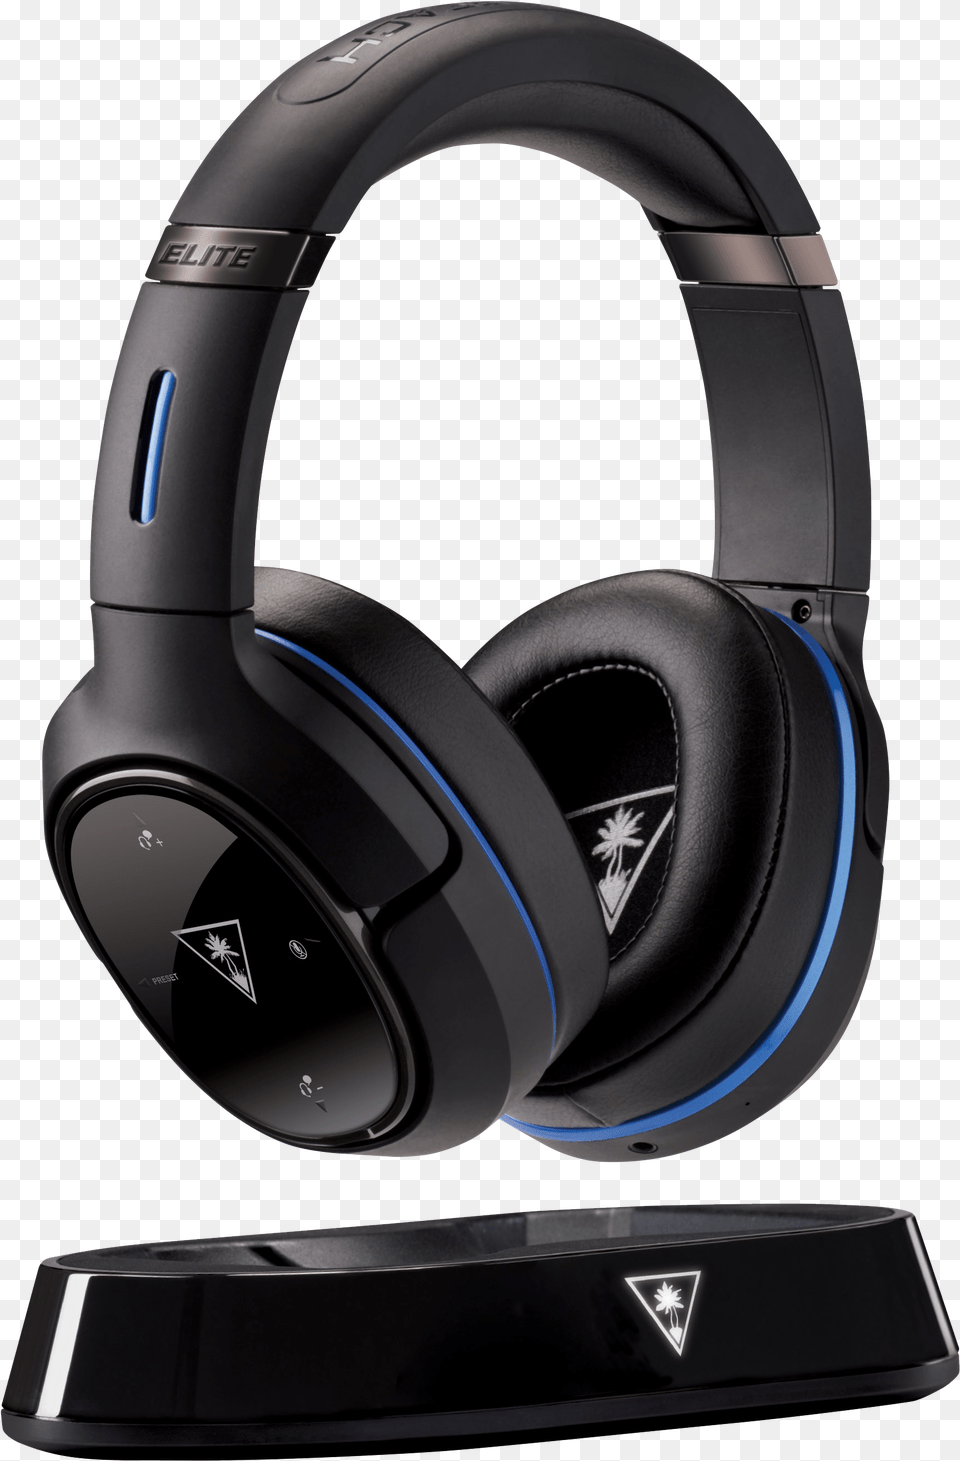 Elite 800 Headset Ps4 Turtle Beach Stealth, Electronics, Headphones Free Png Download